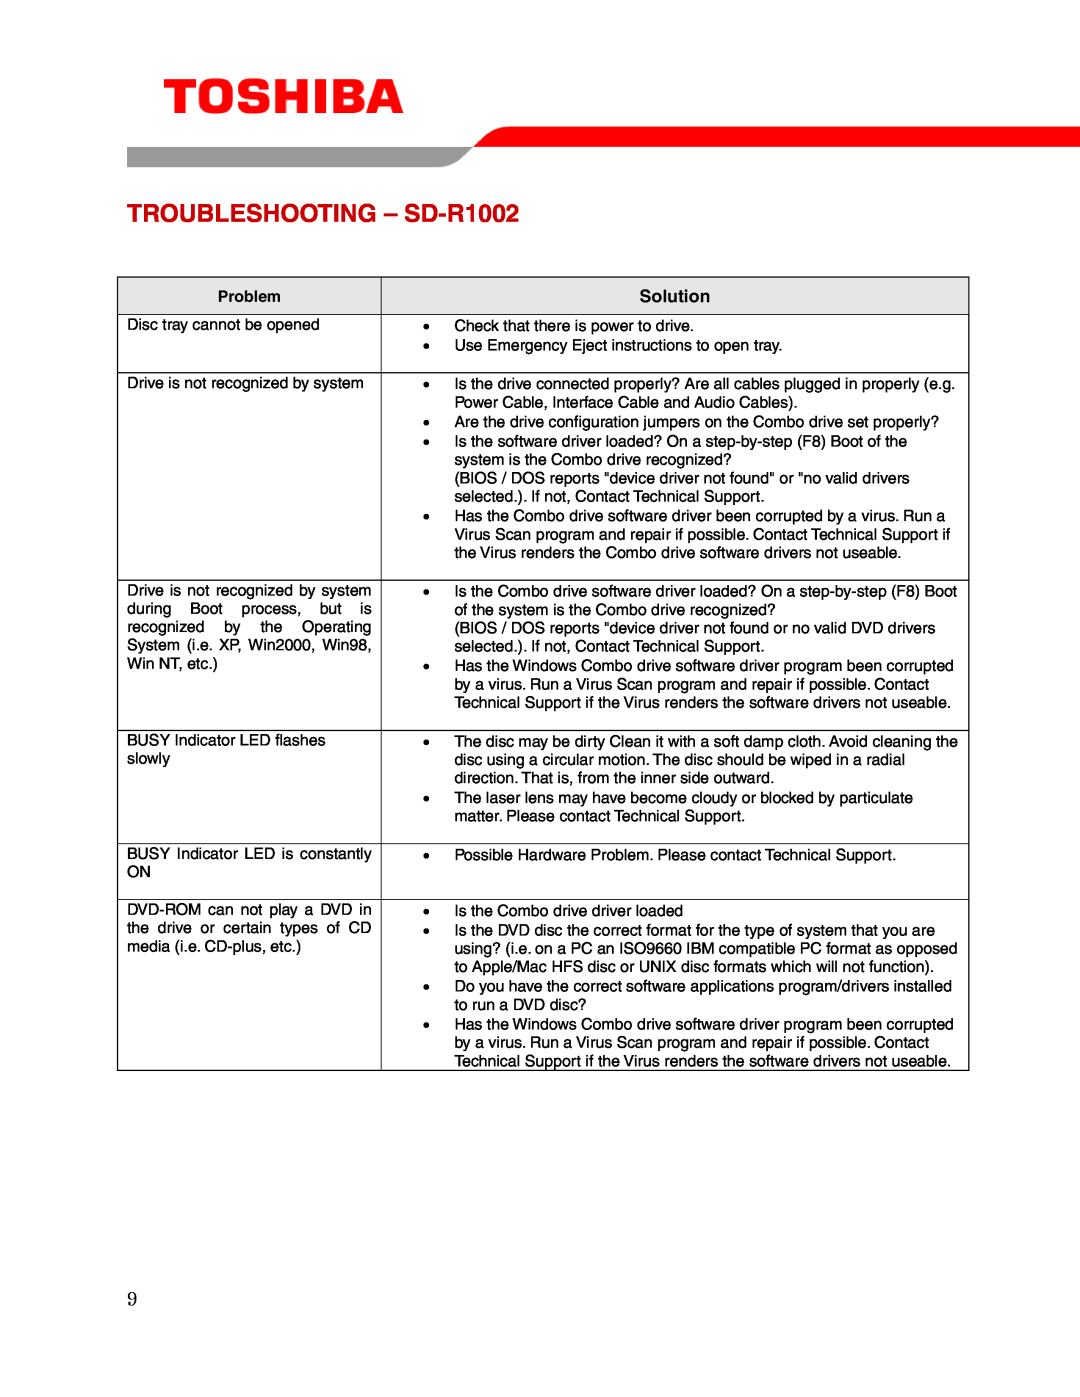 Toshiba user manual TROUBLESHOOTING - SD-R1002, Solution, Problem 